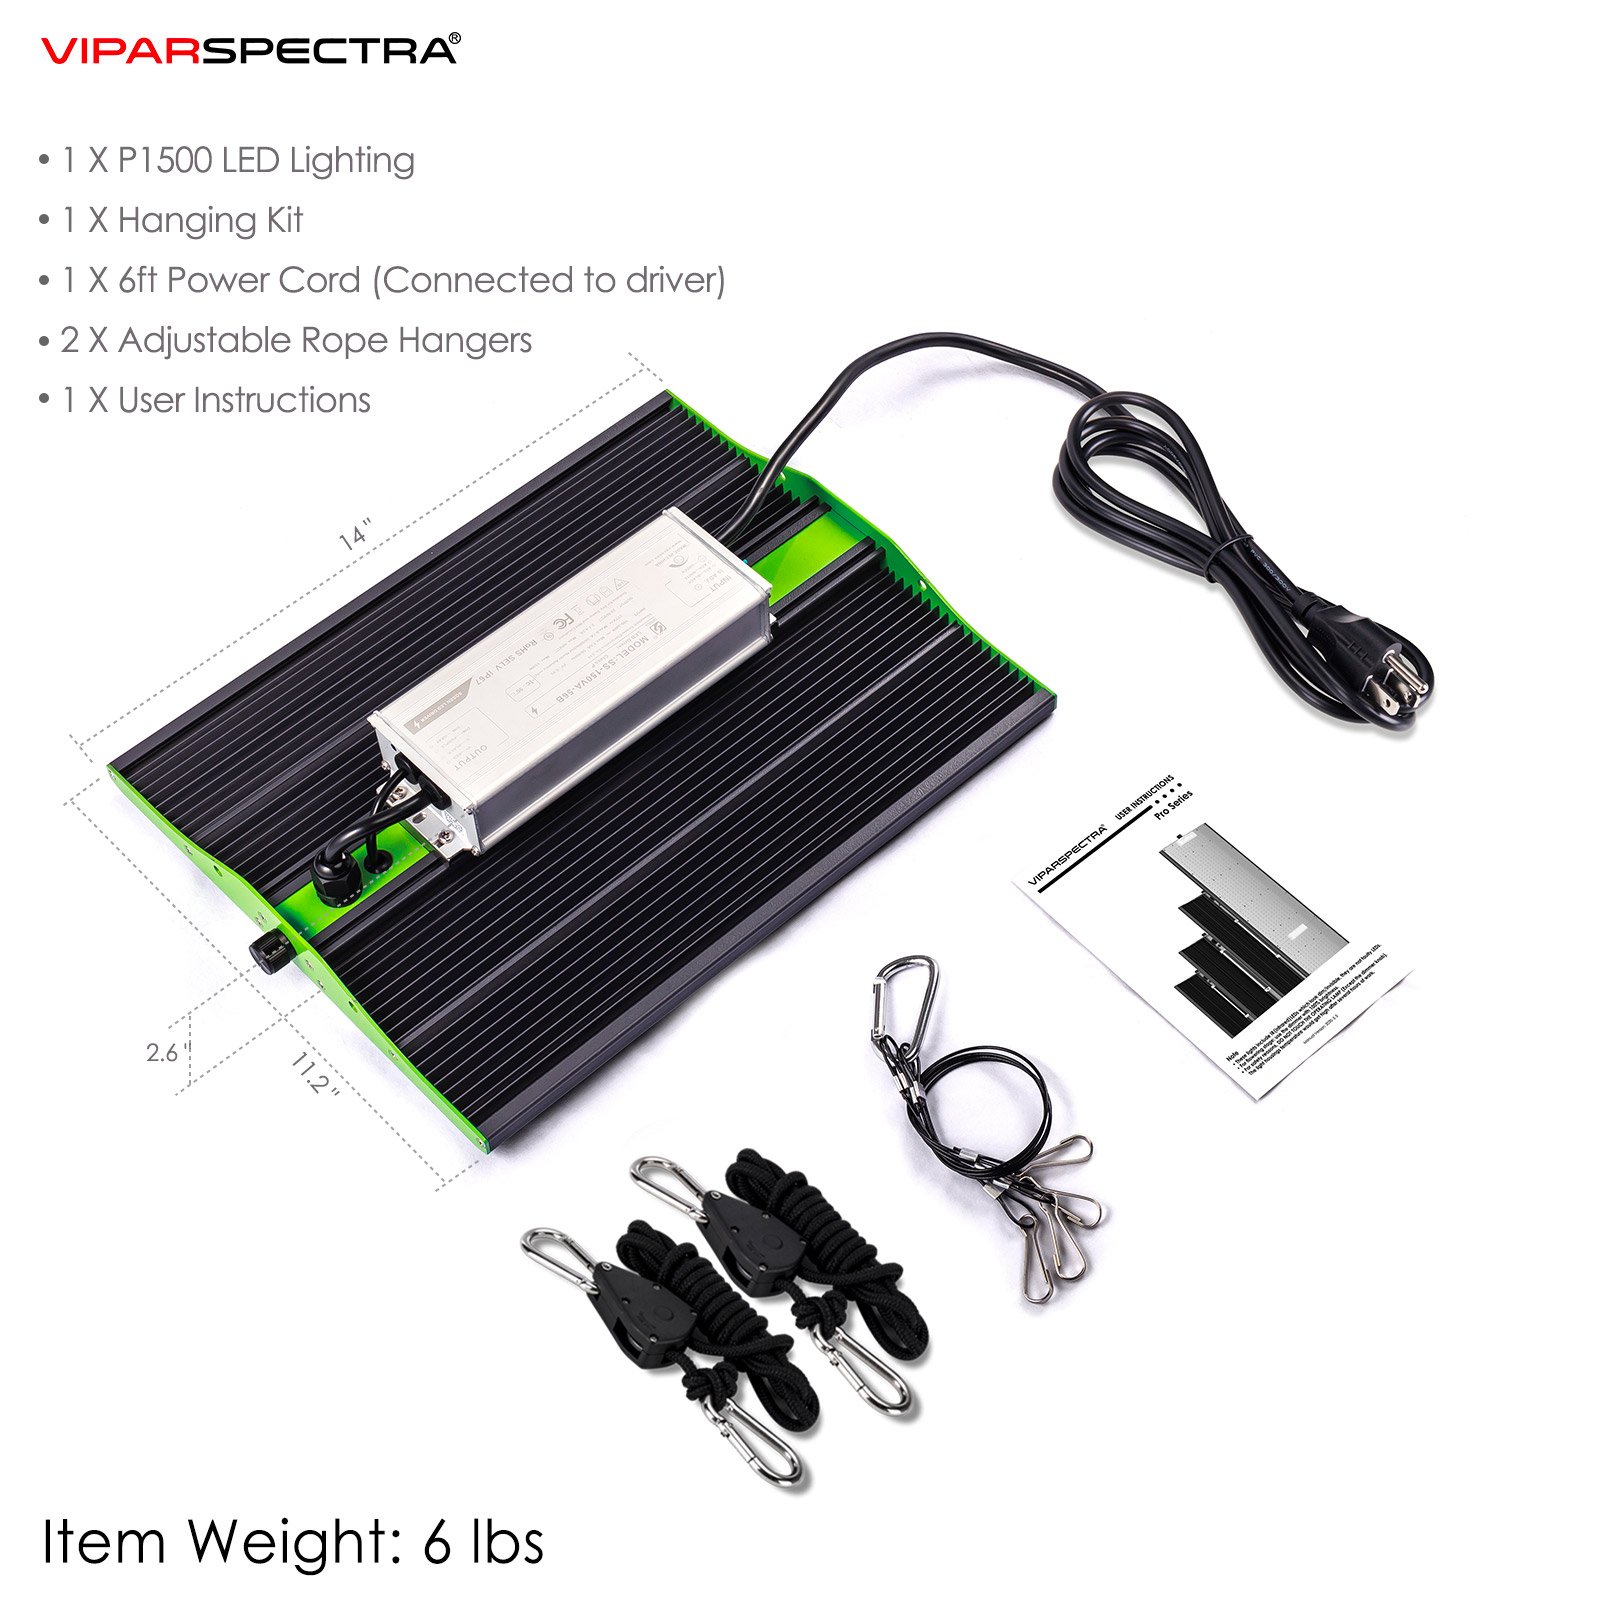 Led cultivo Viparspectra P1500